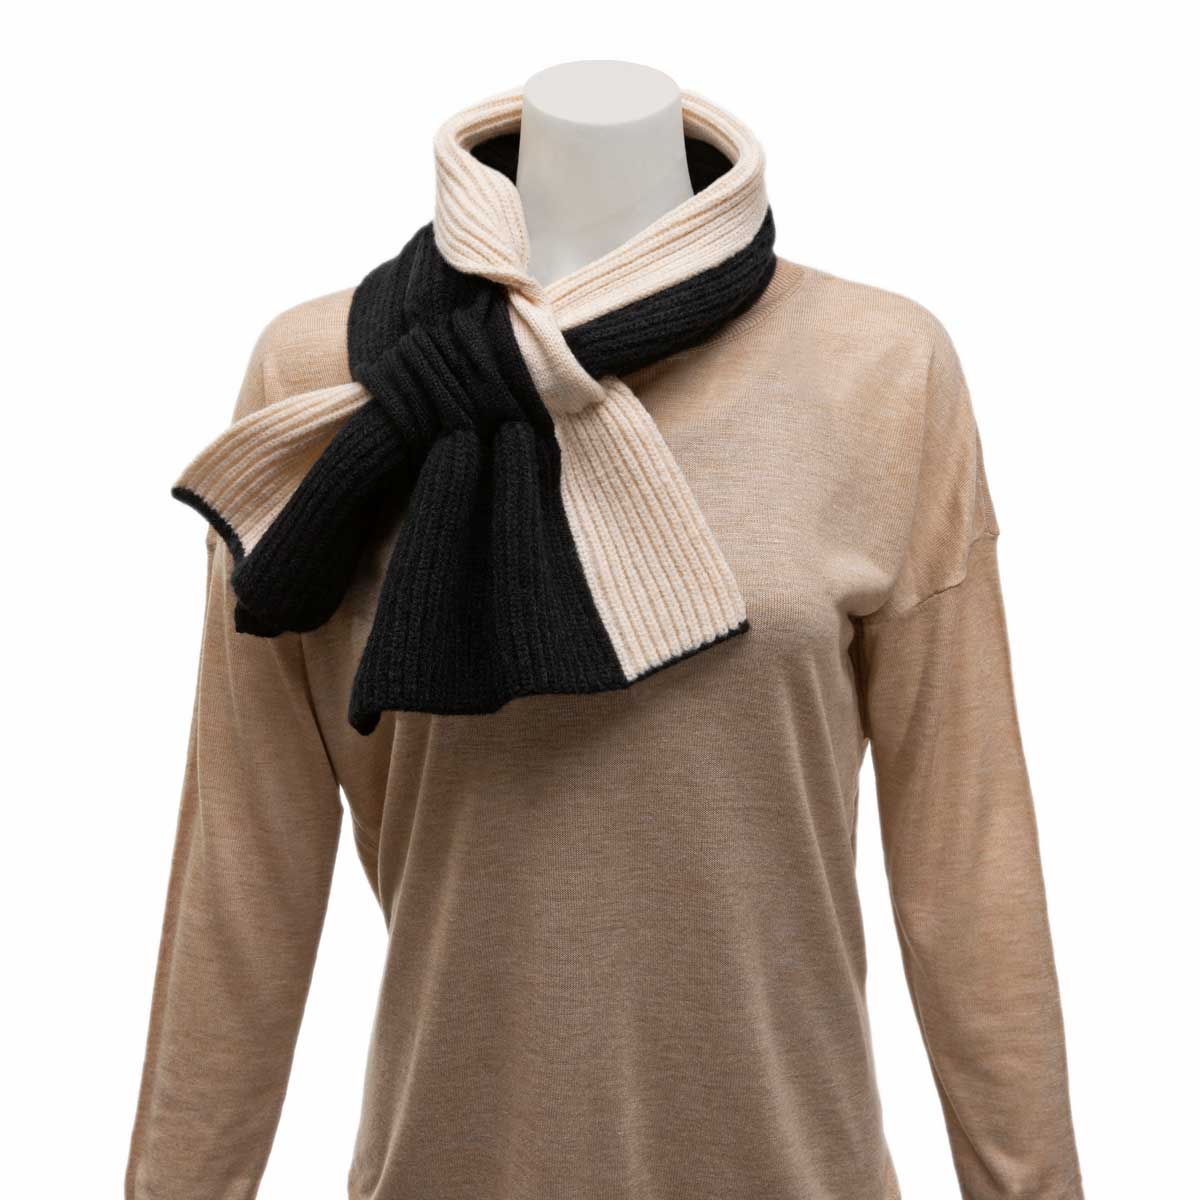 CREAM AND BLACK DOUBLE PULL THROUGH SCARF 11"X38"